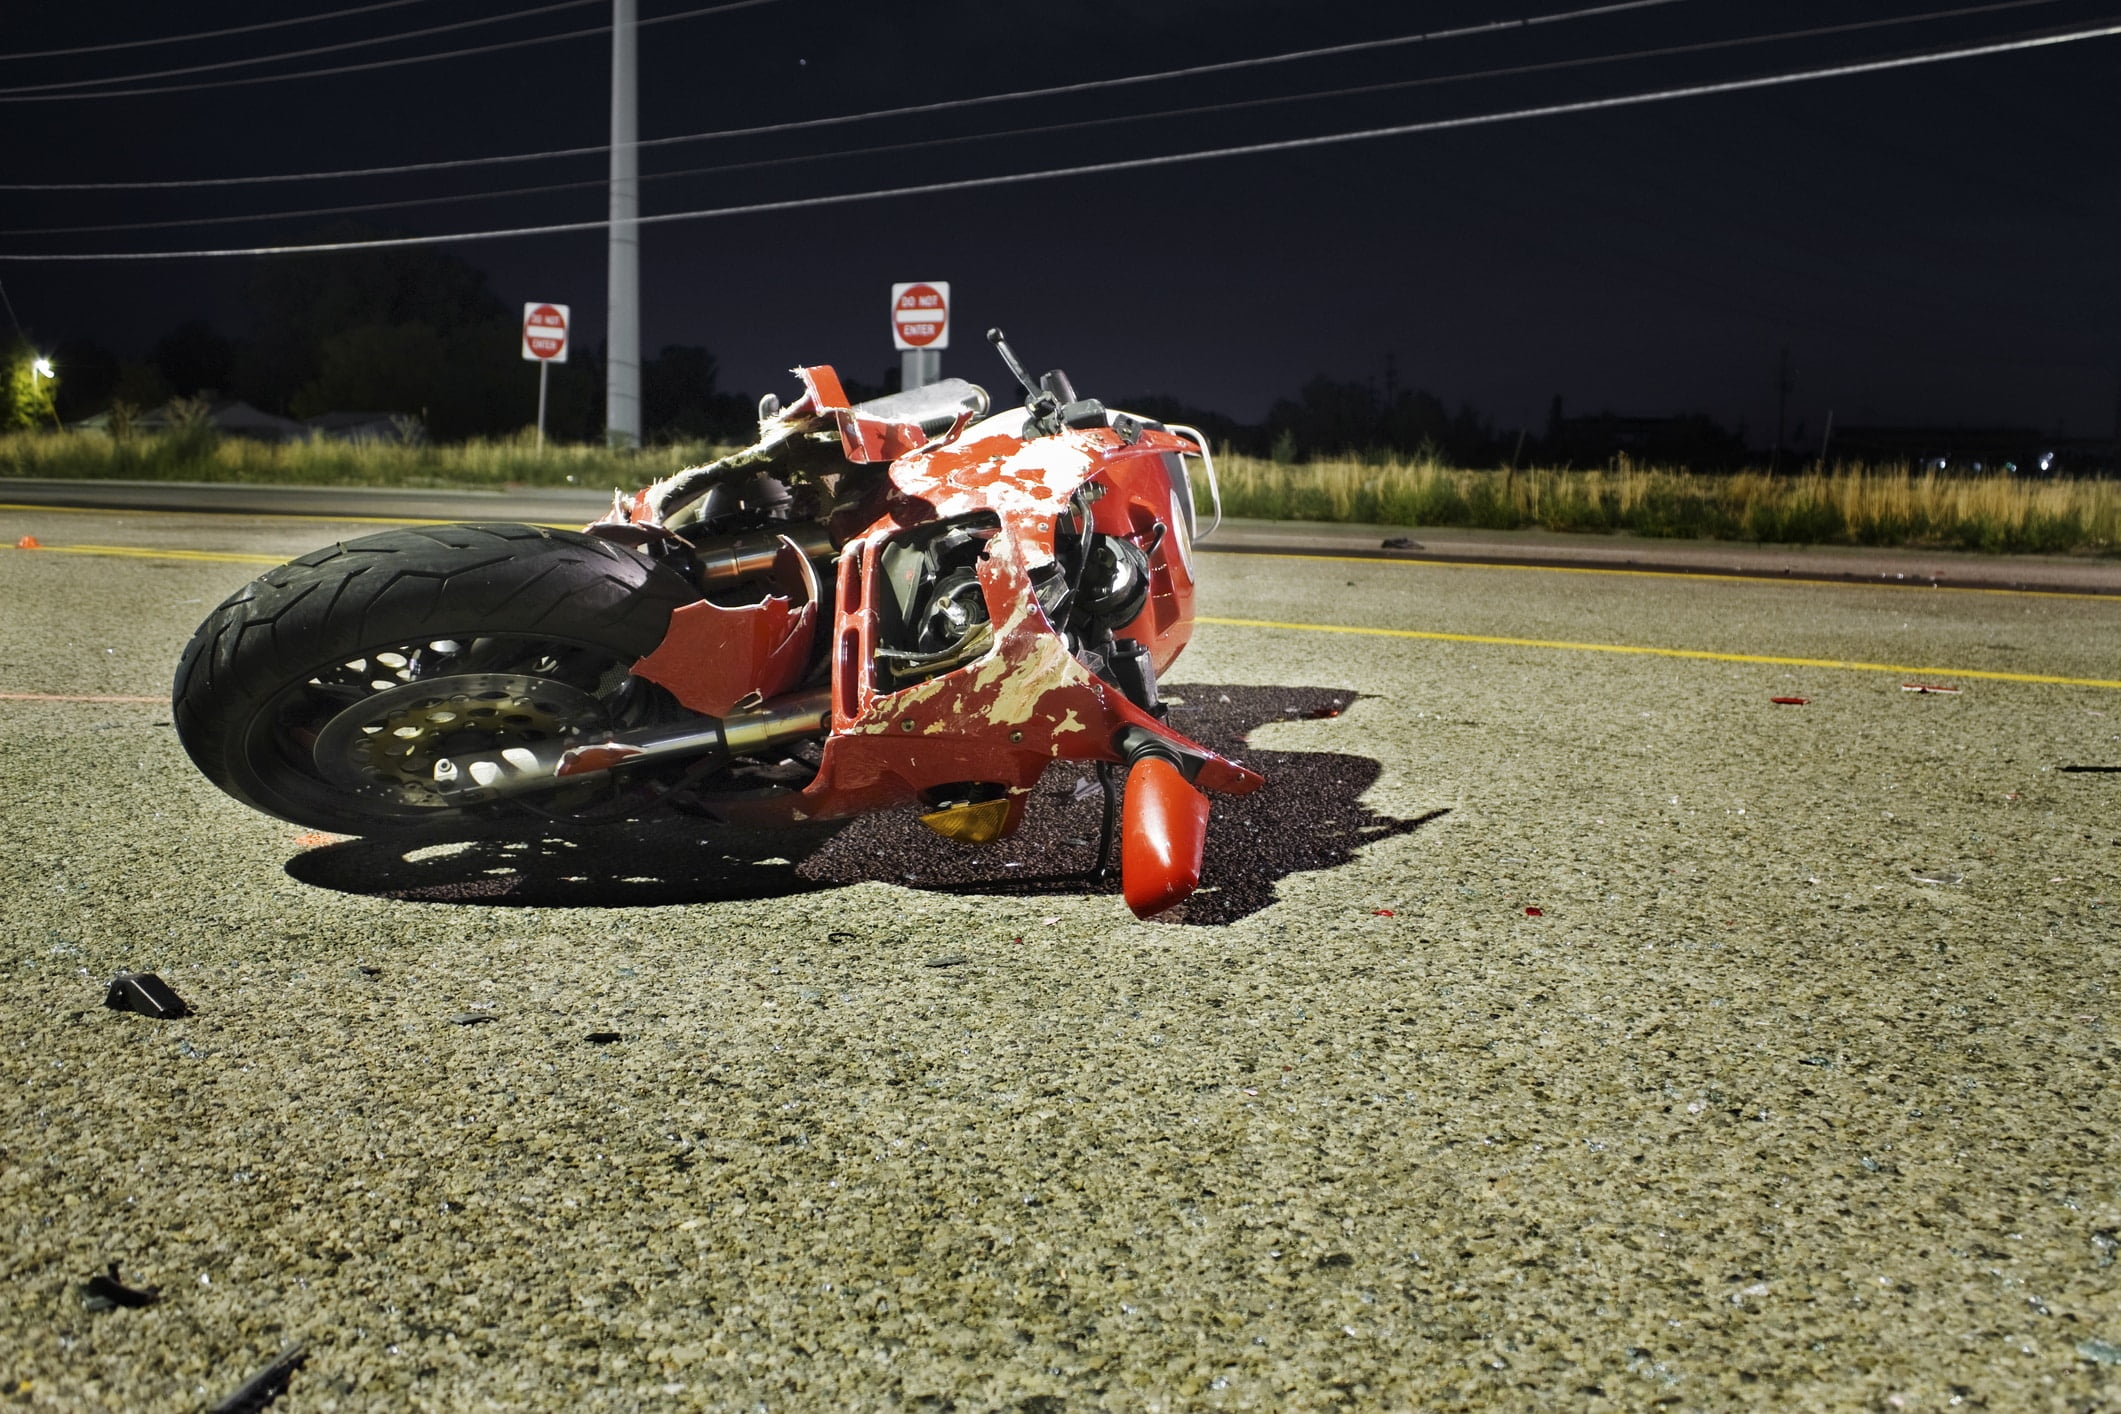 The scene of a motorcycle accident on the road